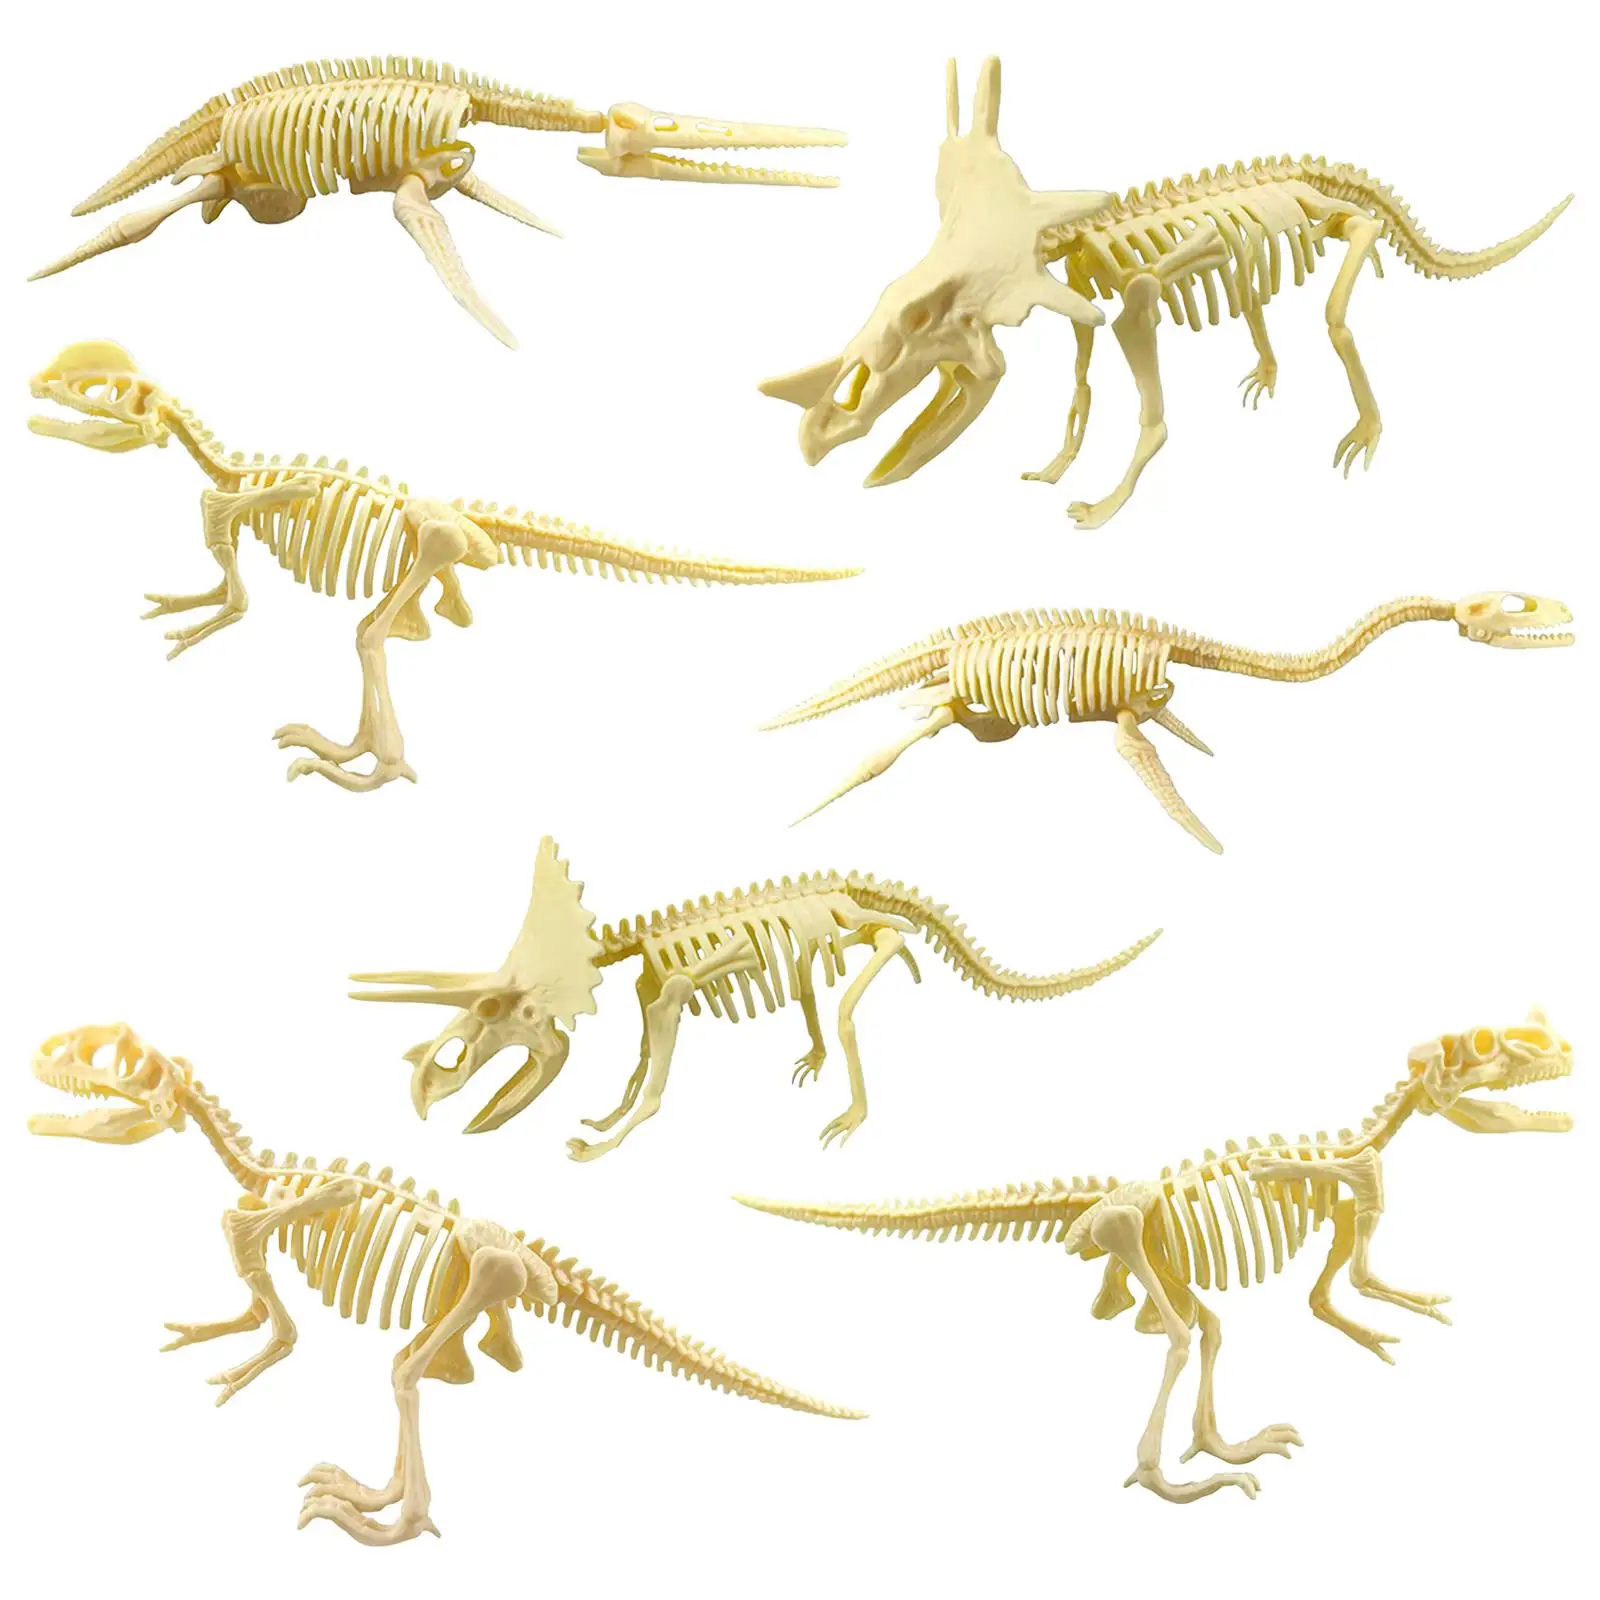 7 Pieces Dinosaur Skeleton Toys Educational Gift for Science Play Party Favor for Kids